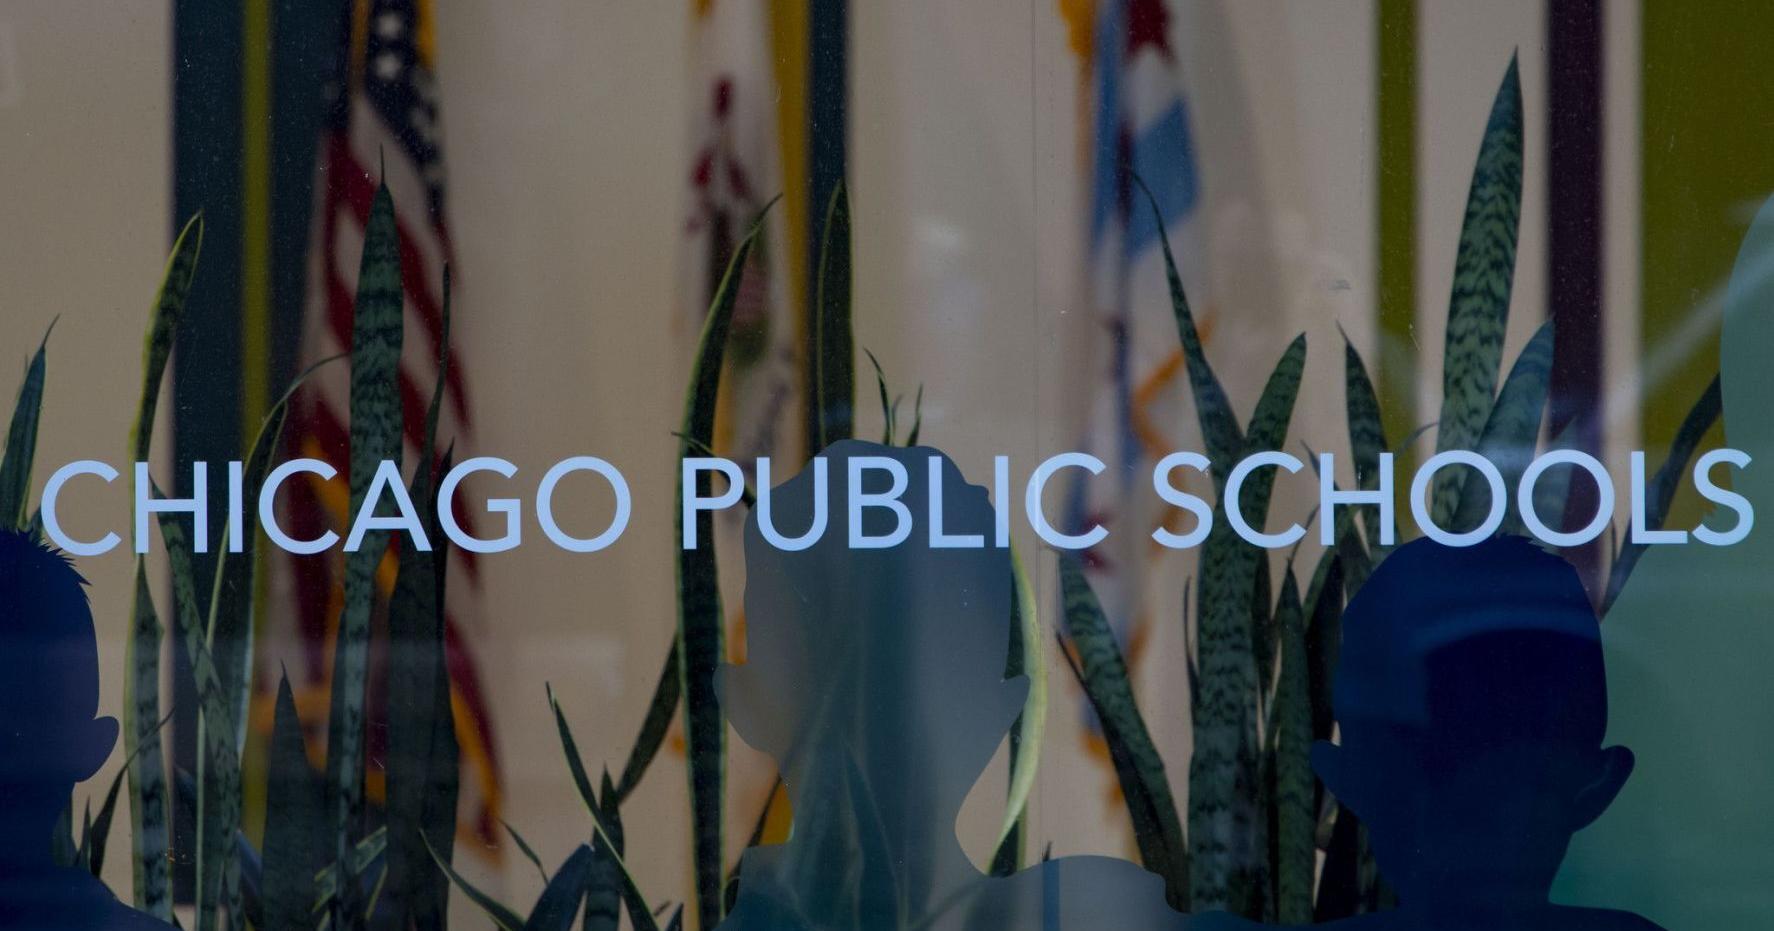 Couple who got $105,000 bill from Chicago Public Schools over residency dispute fights back in court